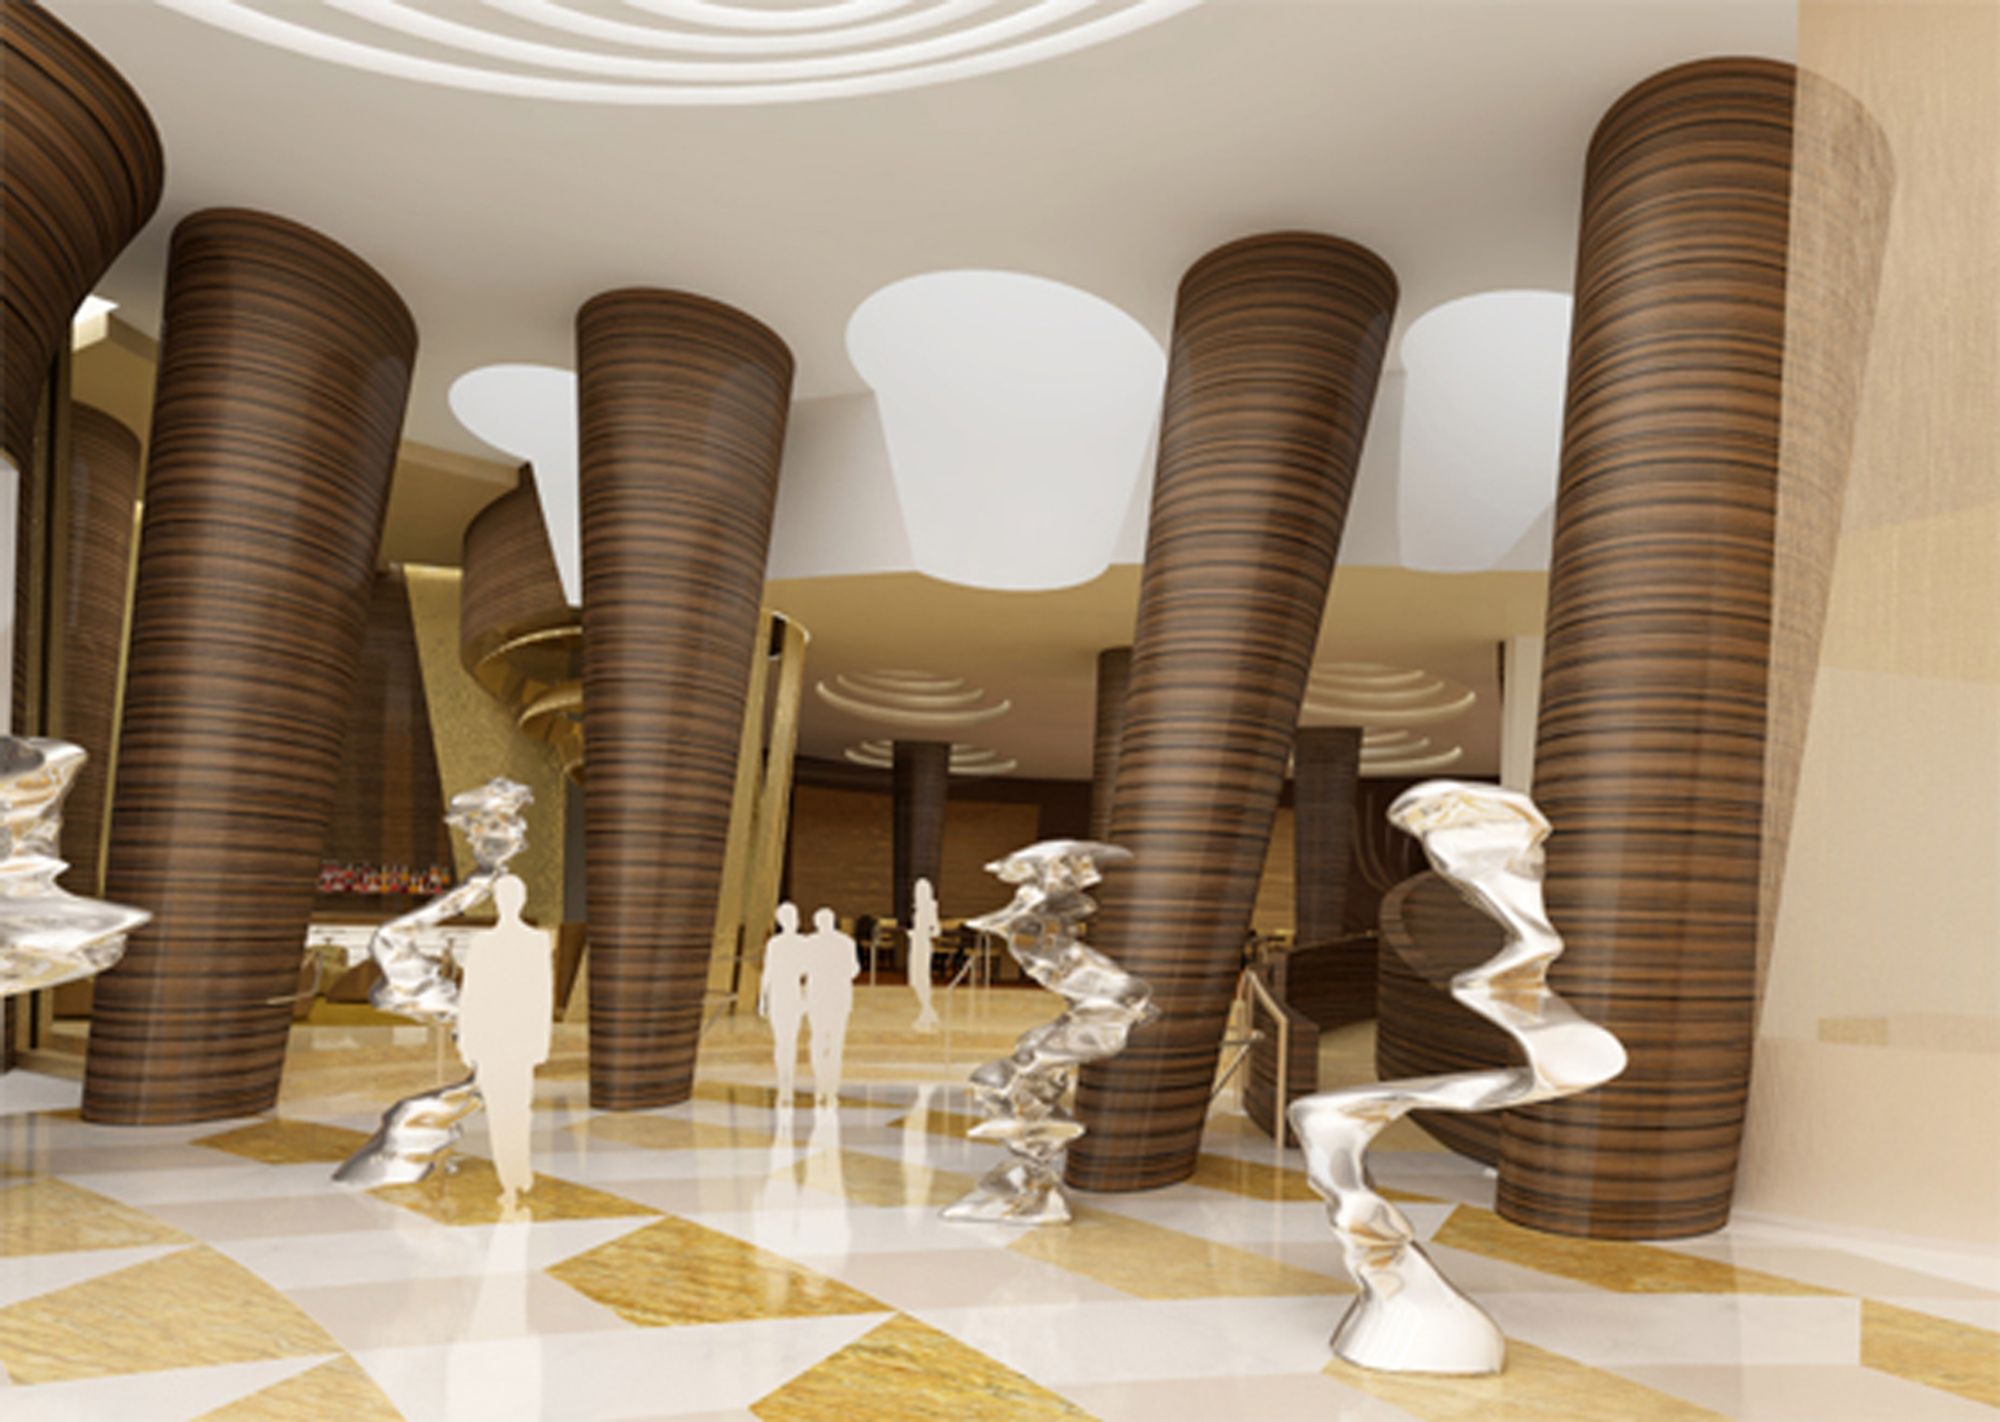 Project Image for MGM City Center Las Vegas